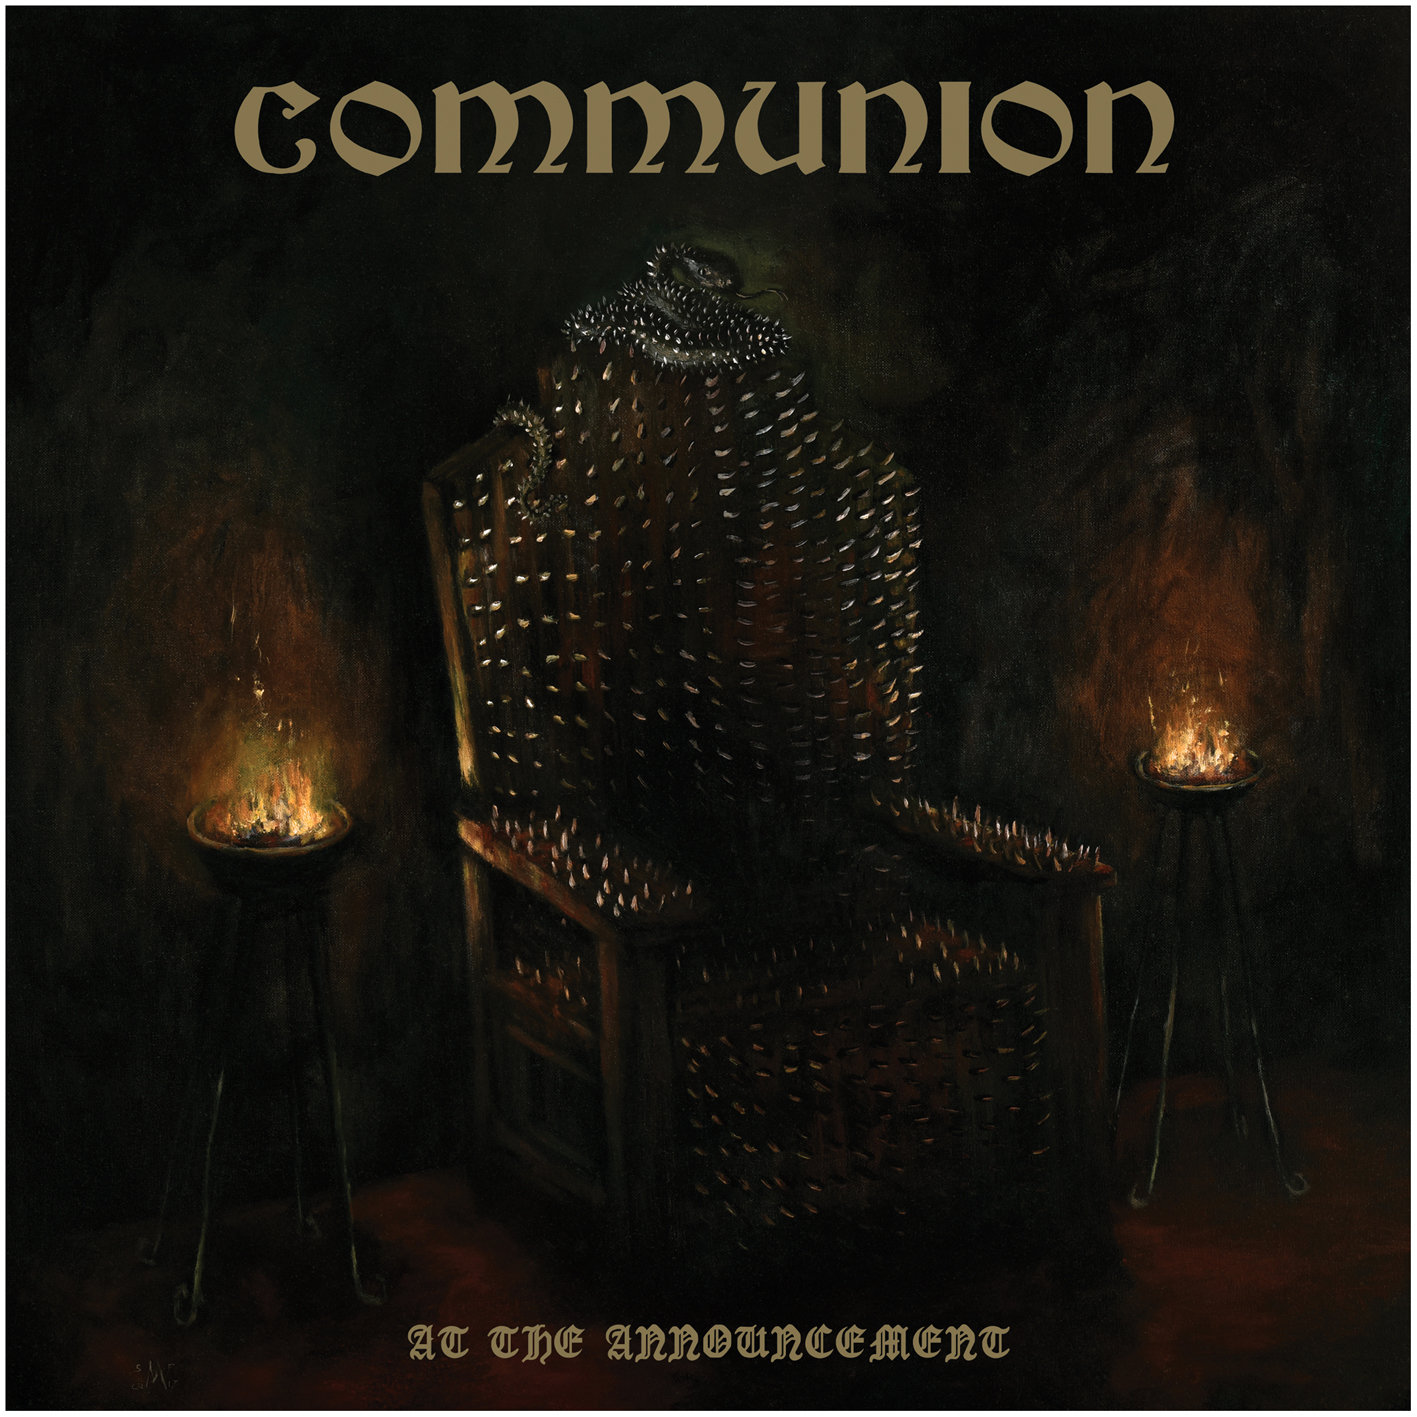 Communion-At-the-announcement-Cover.jpg